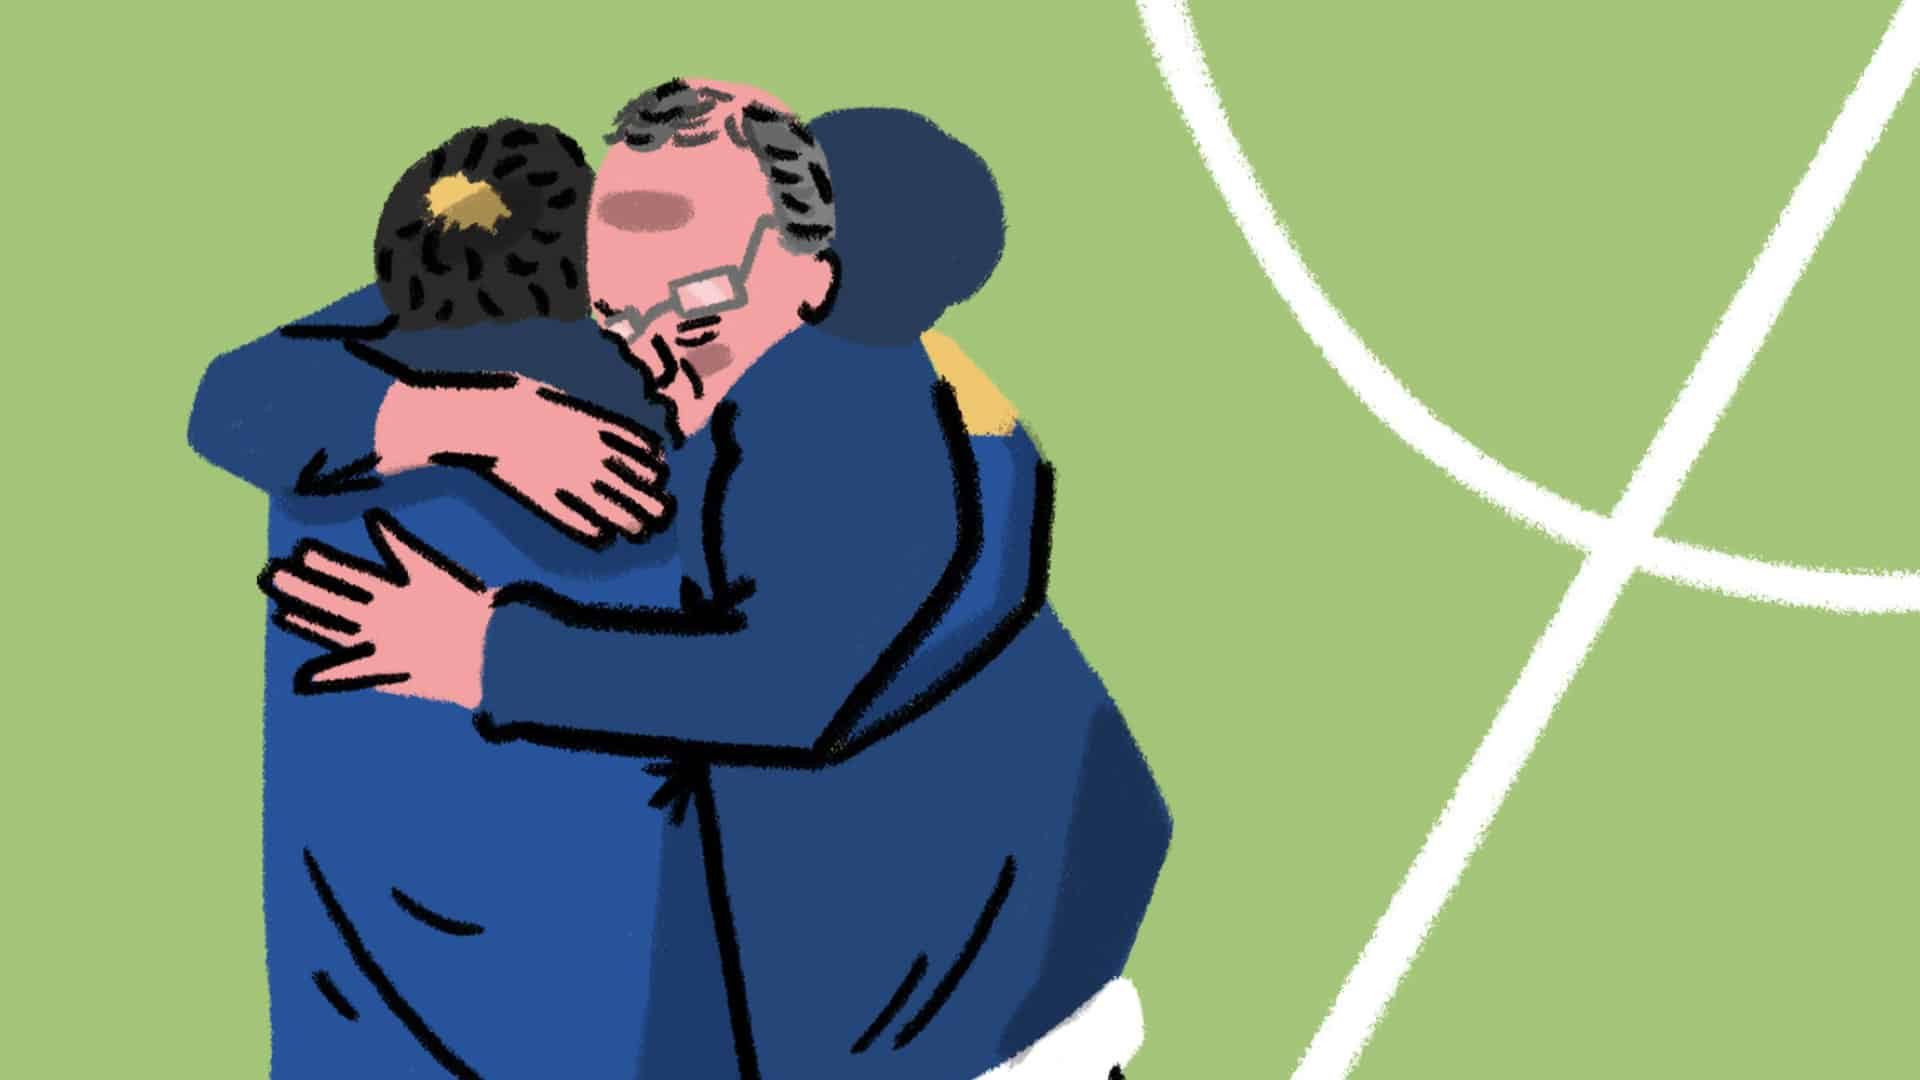 An illustration of Marcelo Bielsa hugging Pablo Quiroga, making his glasses all wonky